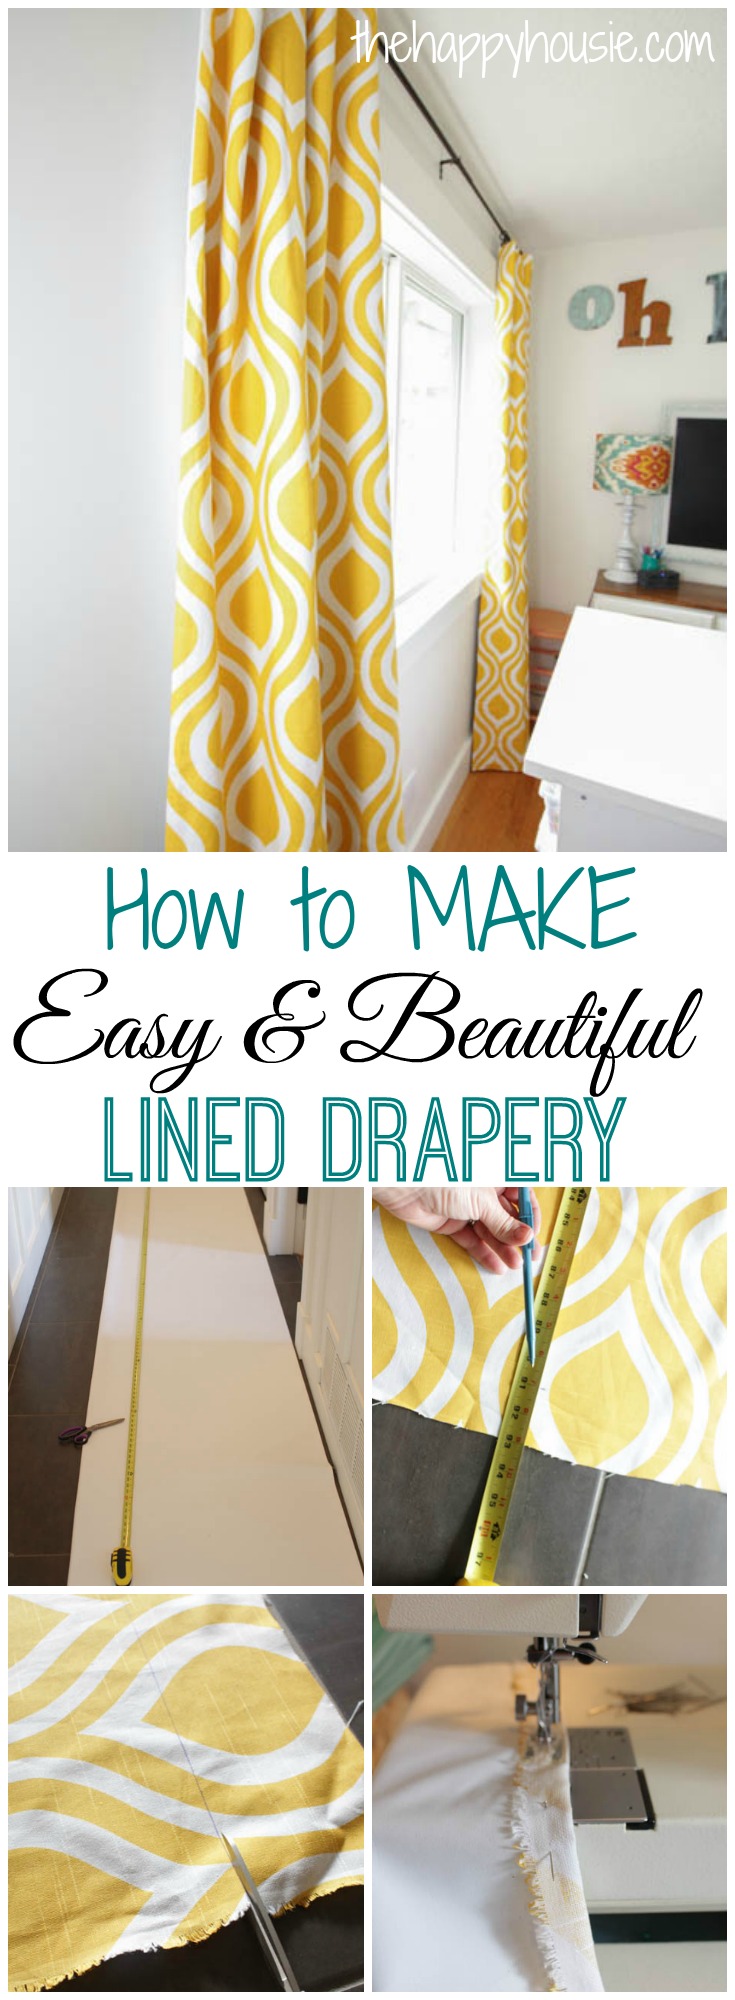 How to make lined drapery poster.